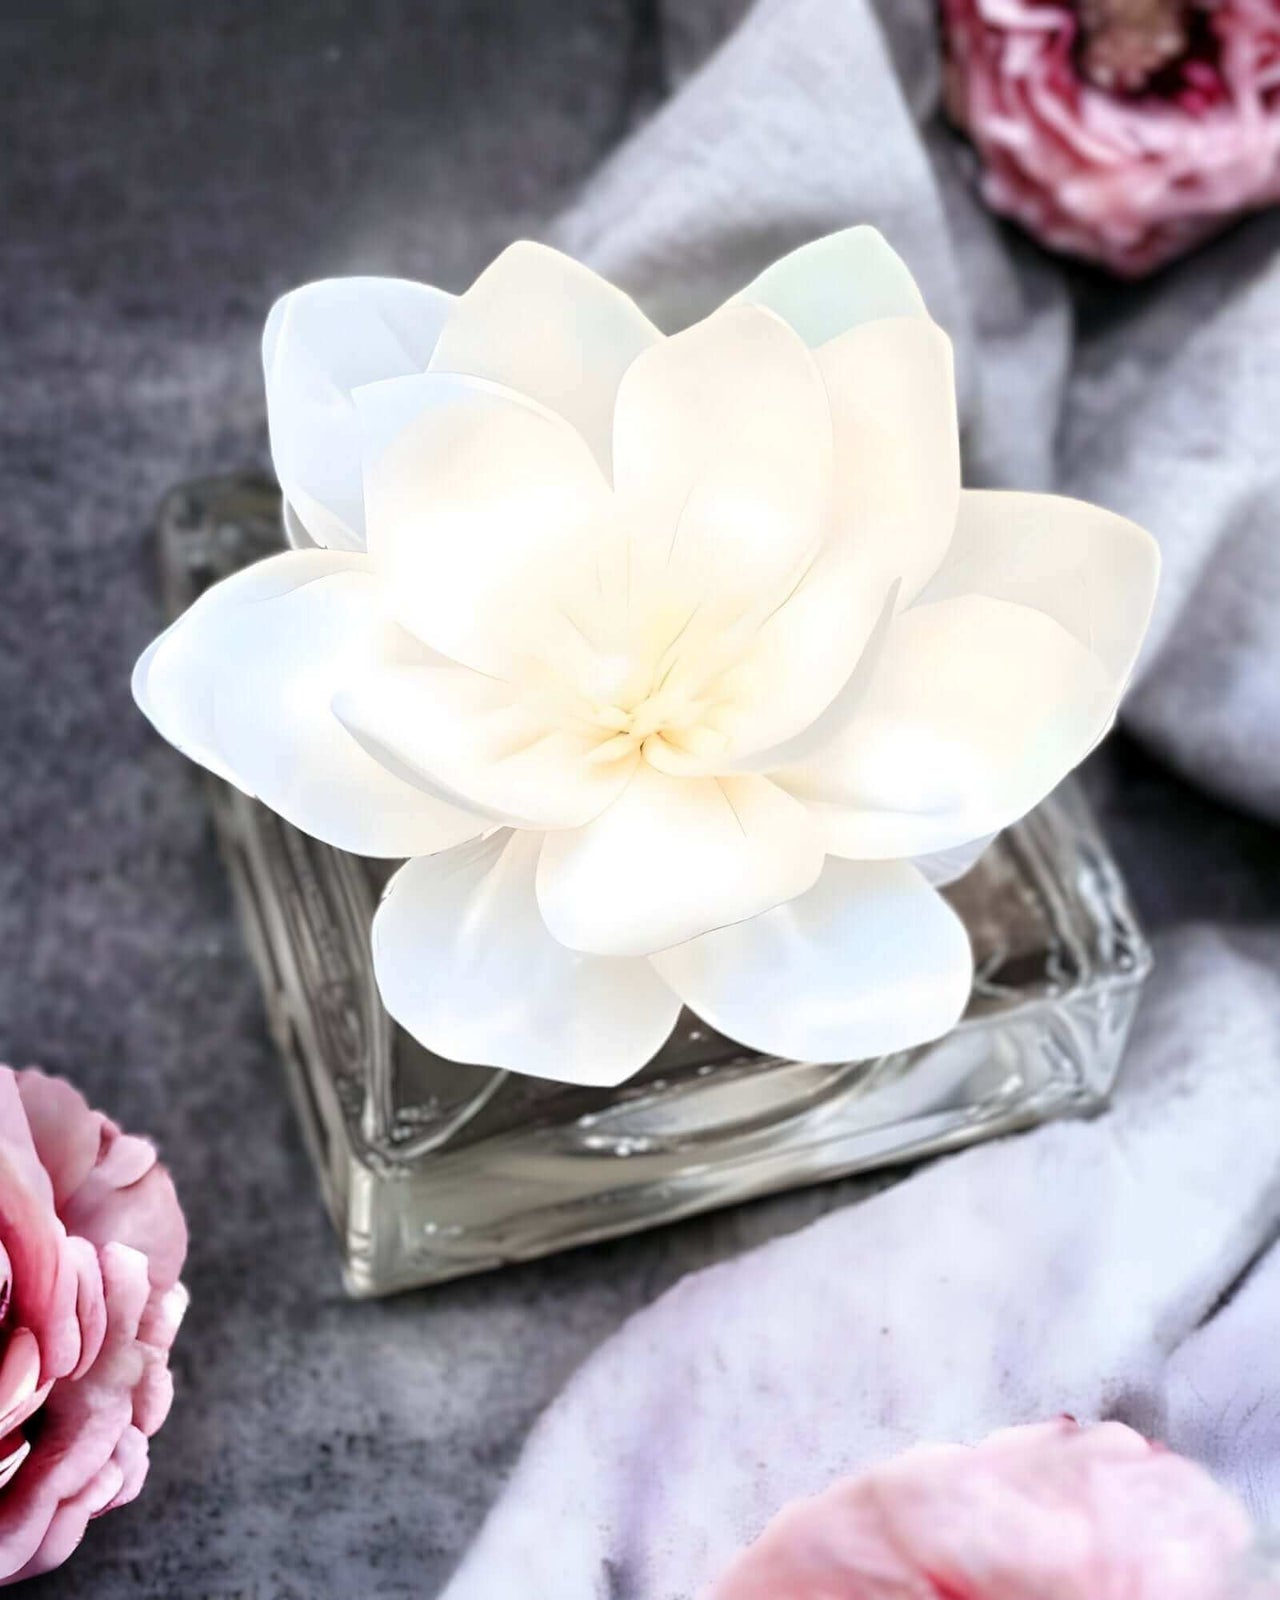 Buy Water Lily Home Fragrance Diffuser | Natural for only A$40.00 at Enchanting Aromas!